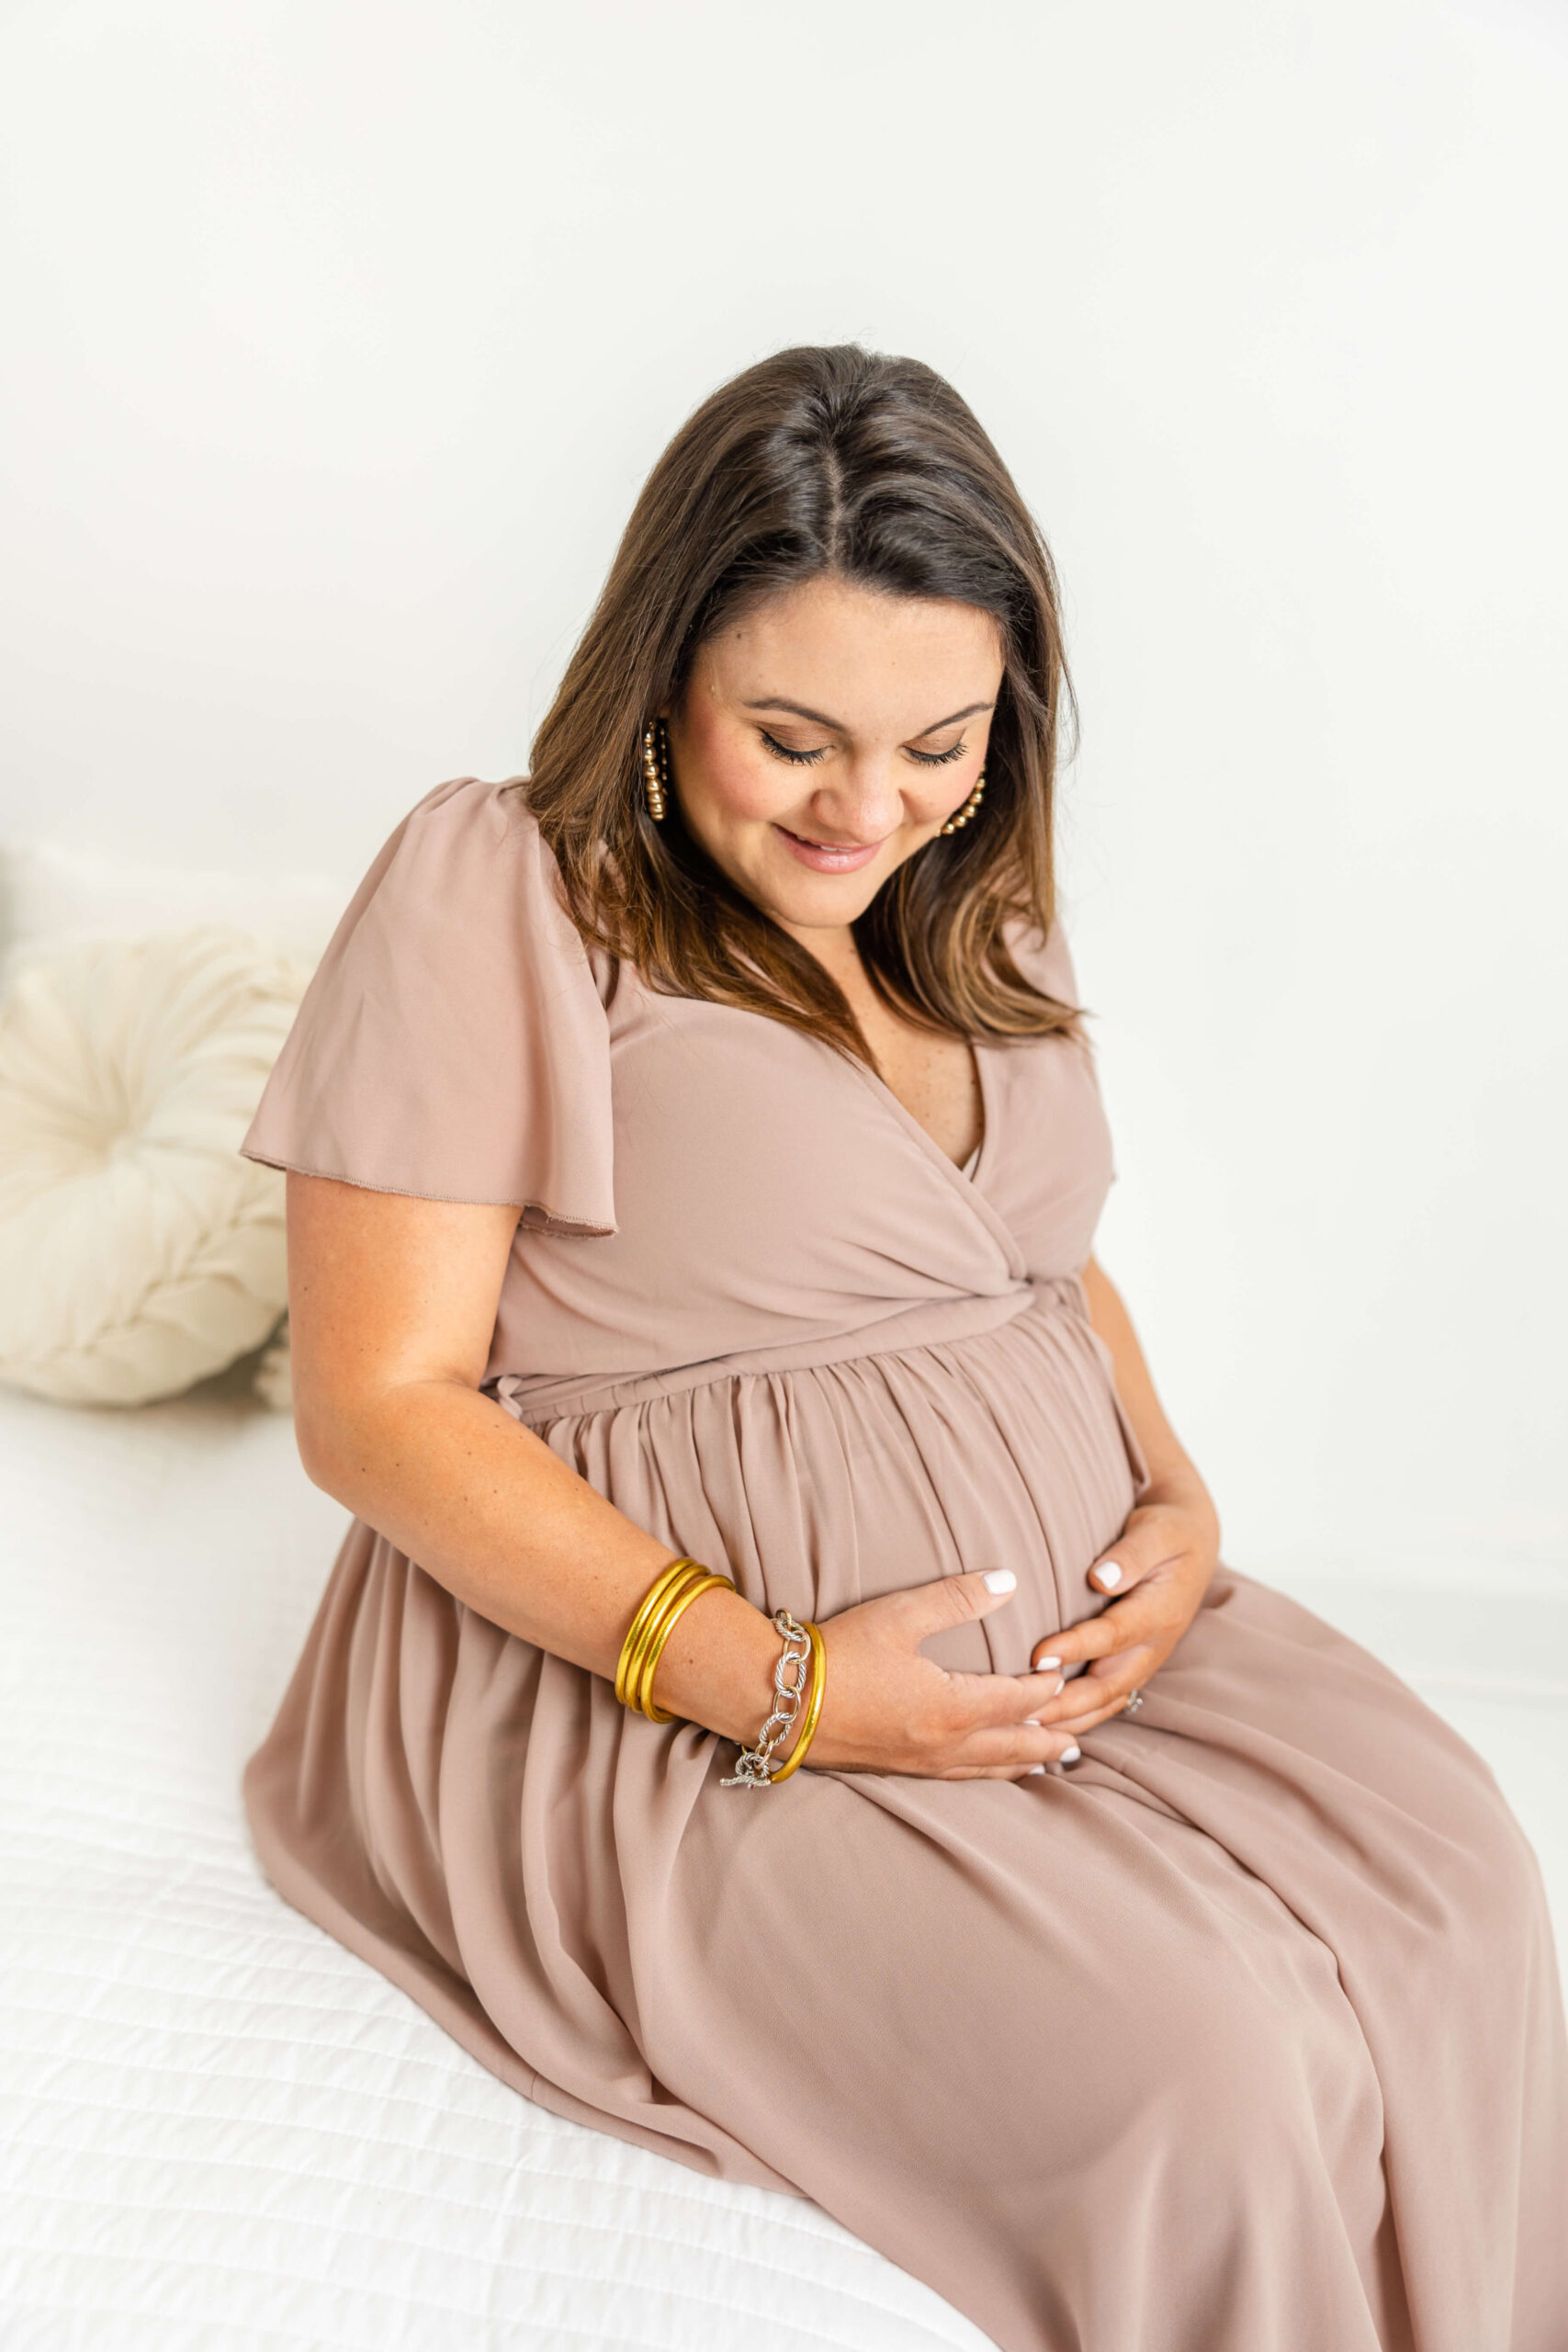 Pregnant mom sitting on white bed in mauve dress showing her baby bump. Client is featured in the 5 Local Places to Host a Baby Shower in Augusta blog.